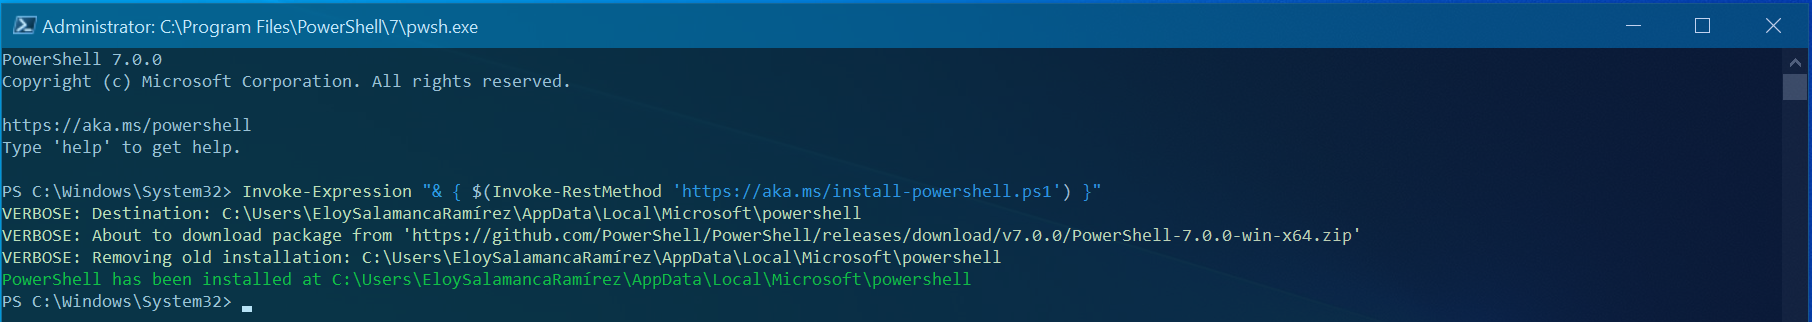 Updating PowerShell to the latest or Preview release via REST method